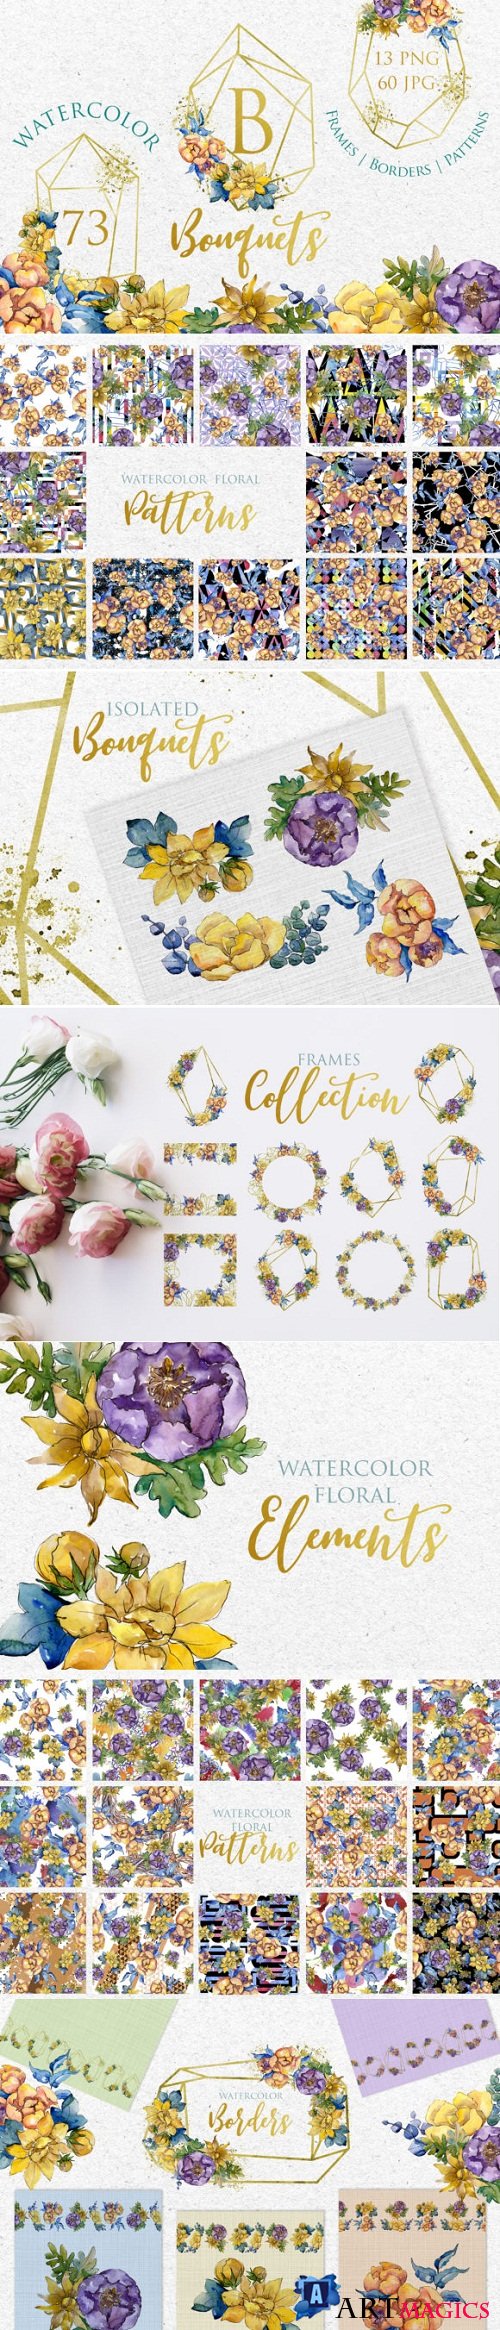 Bouquets Yellow Watercolor png 3372062